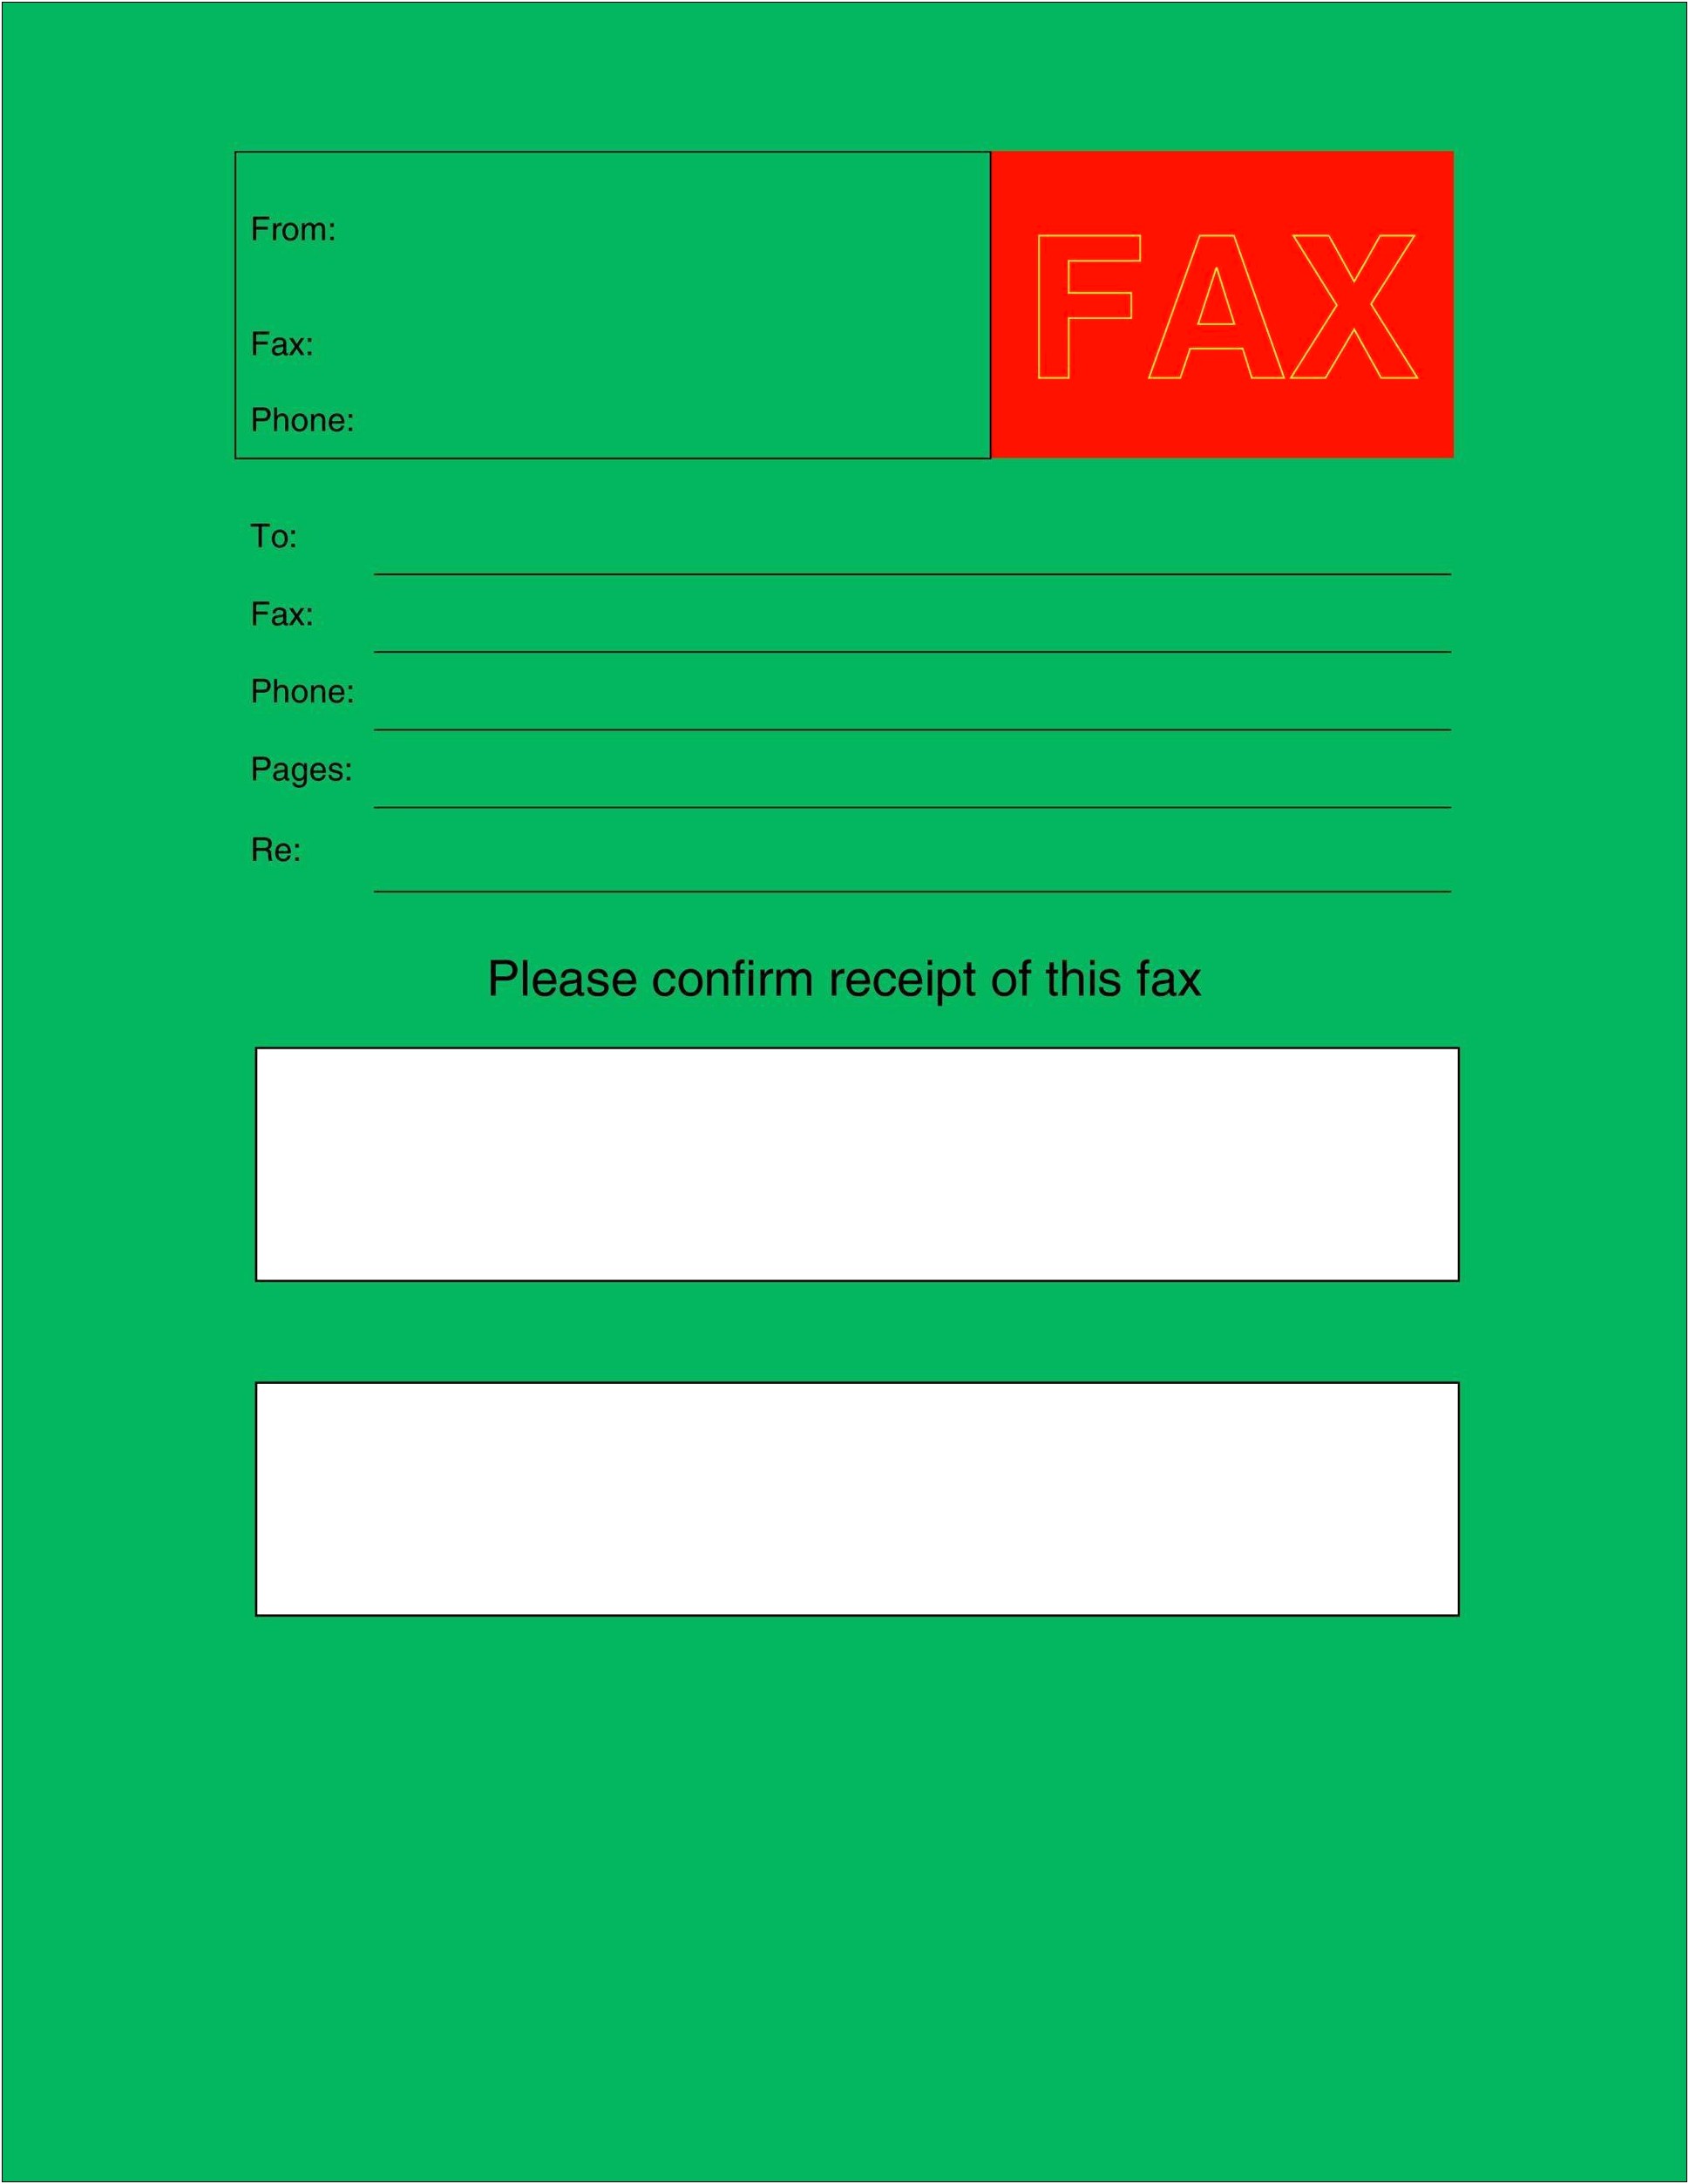 Basic Fax Cover Sheet Free Resume